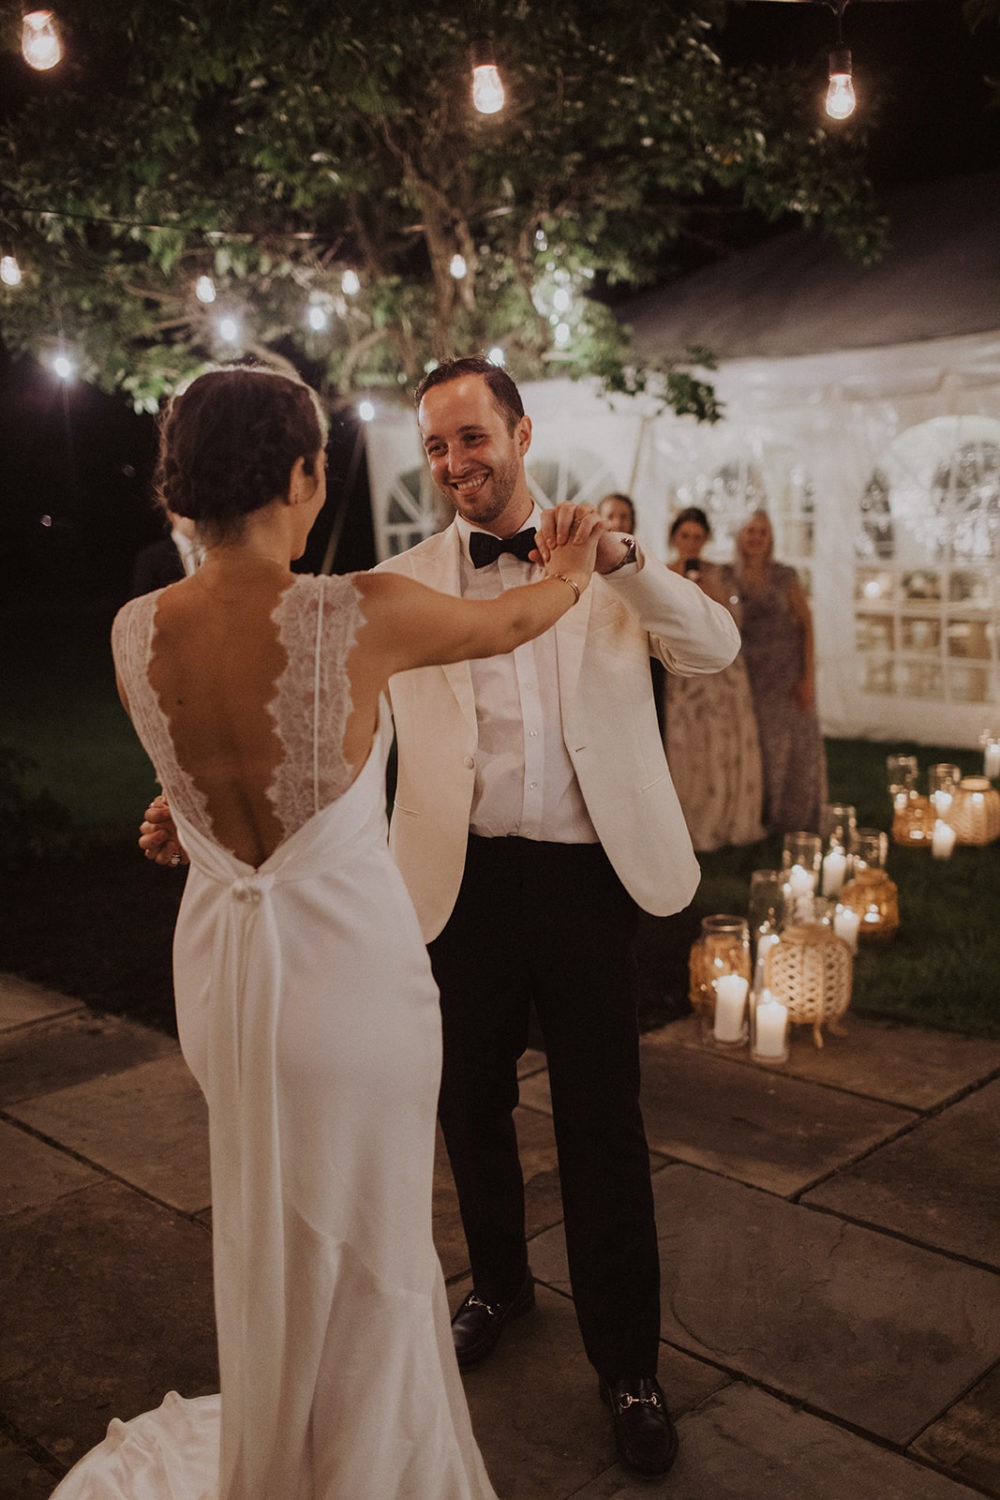 Couple dances at backyard wedding lit by twinkle lights and candles